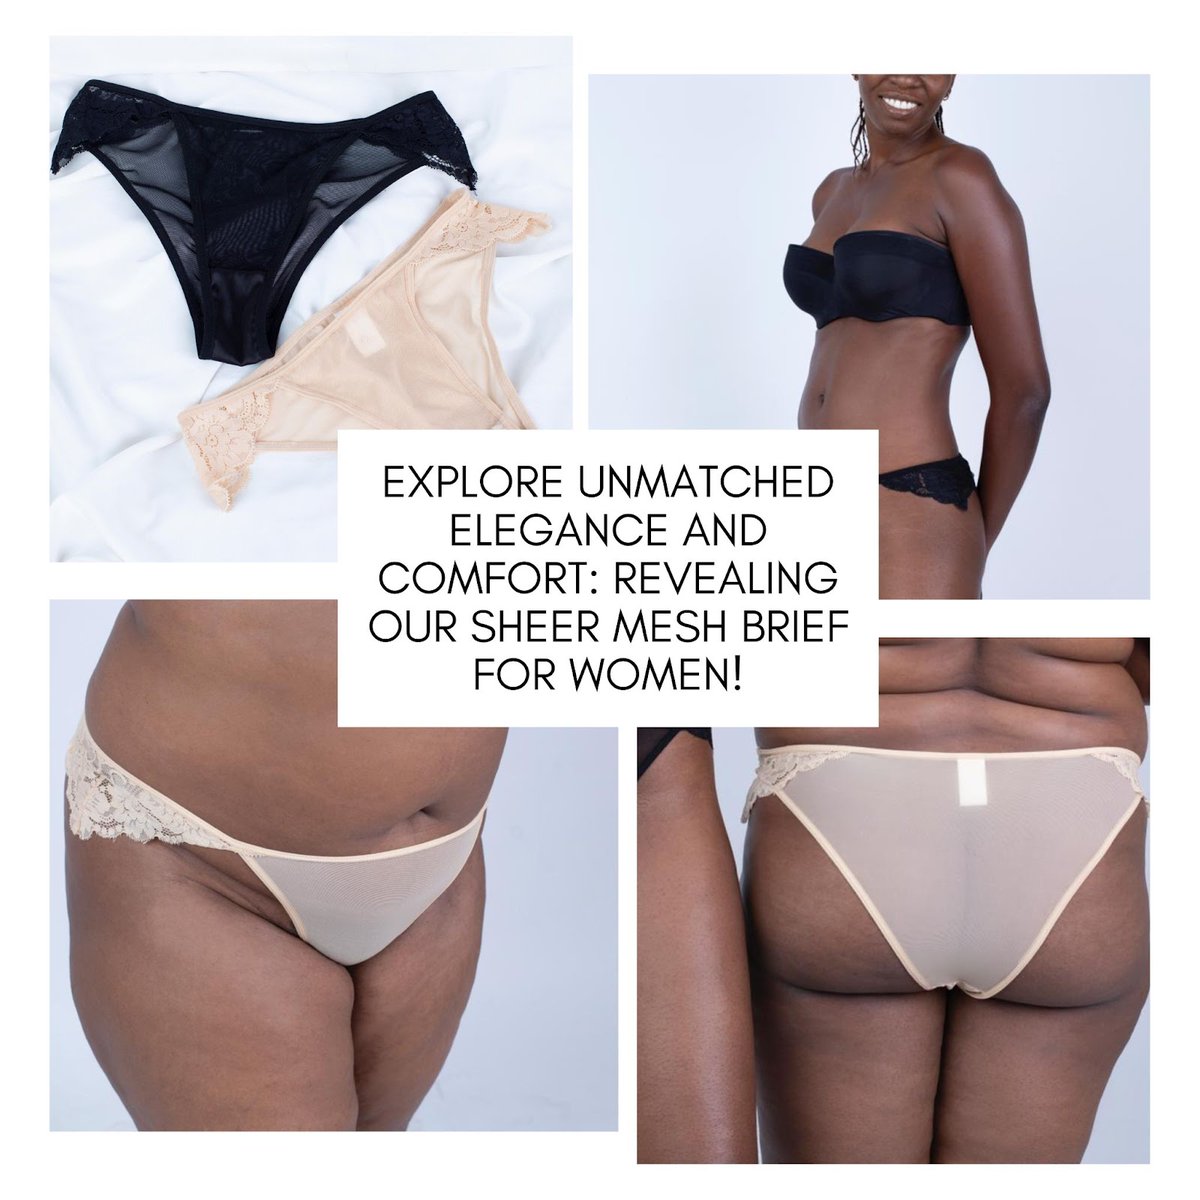 'Embark on a journey of allure and comfort with our Sheer Mesh Brief, a seamless blend of elegance and softness crafted exclusively for you. Precision-designed and created with sheer perfection.
--
Explore the Collection:
jannienayah.com/product/sheer-… 
.
#IntimateElegance